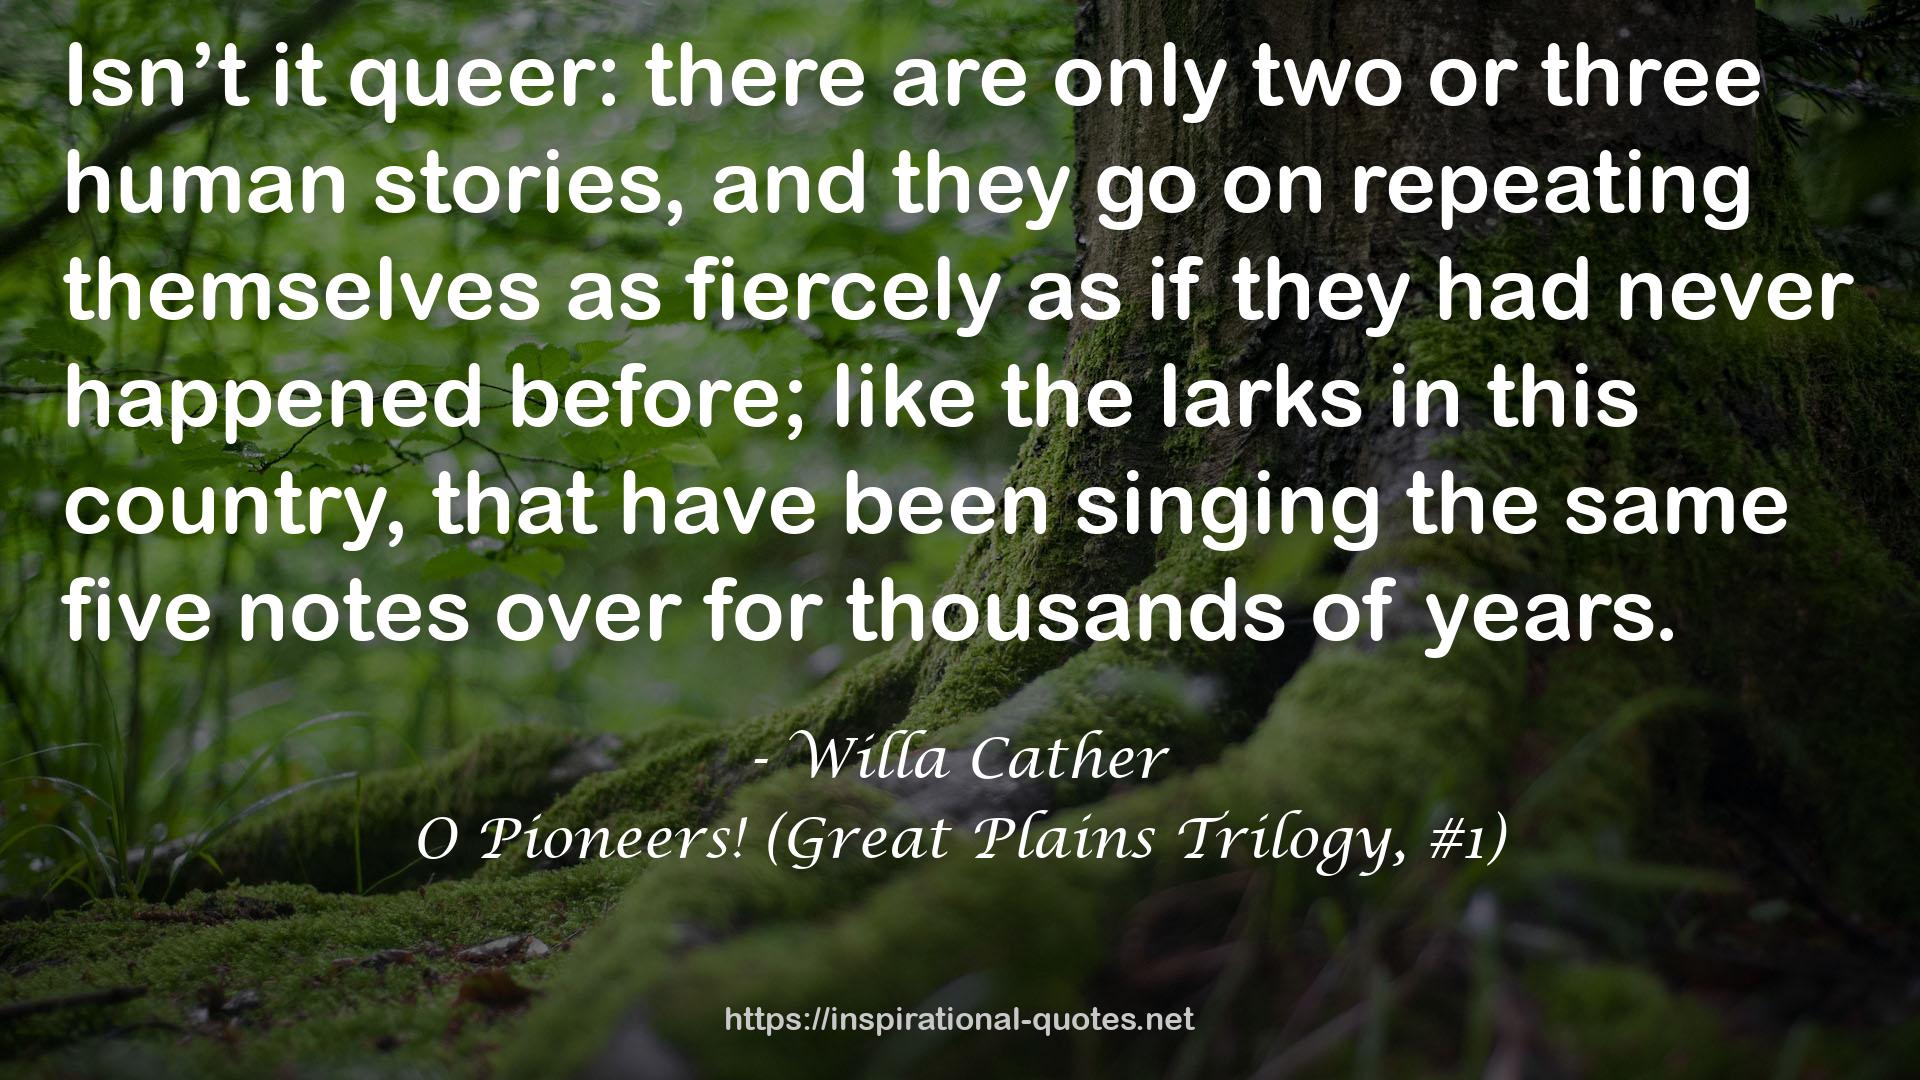 O Pioneers! (Great Plains Trilogy, #1) QUOTES